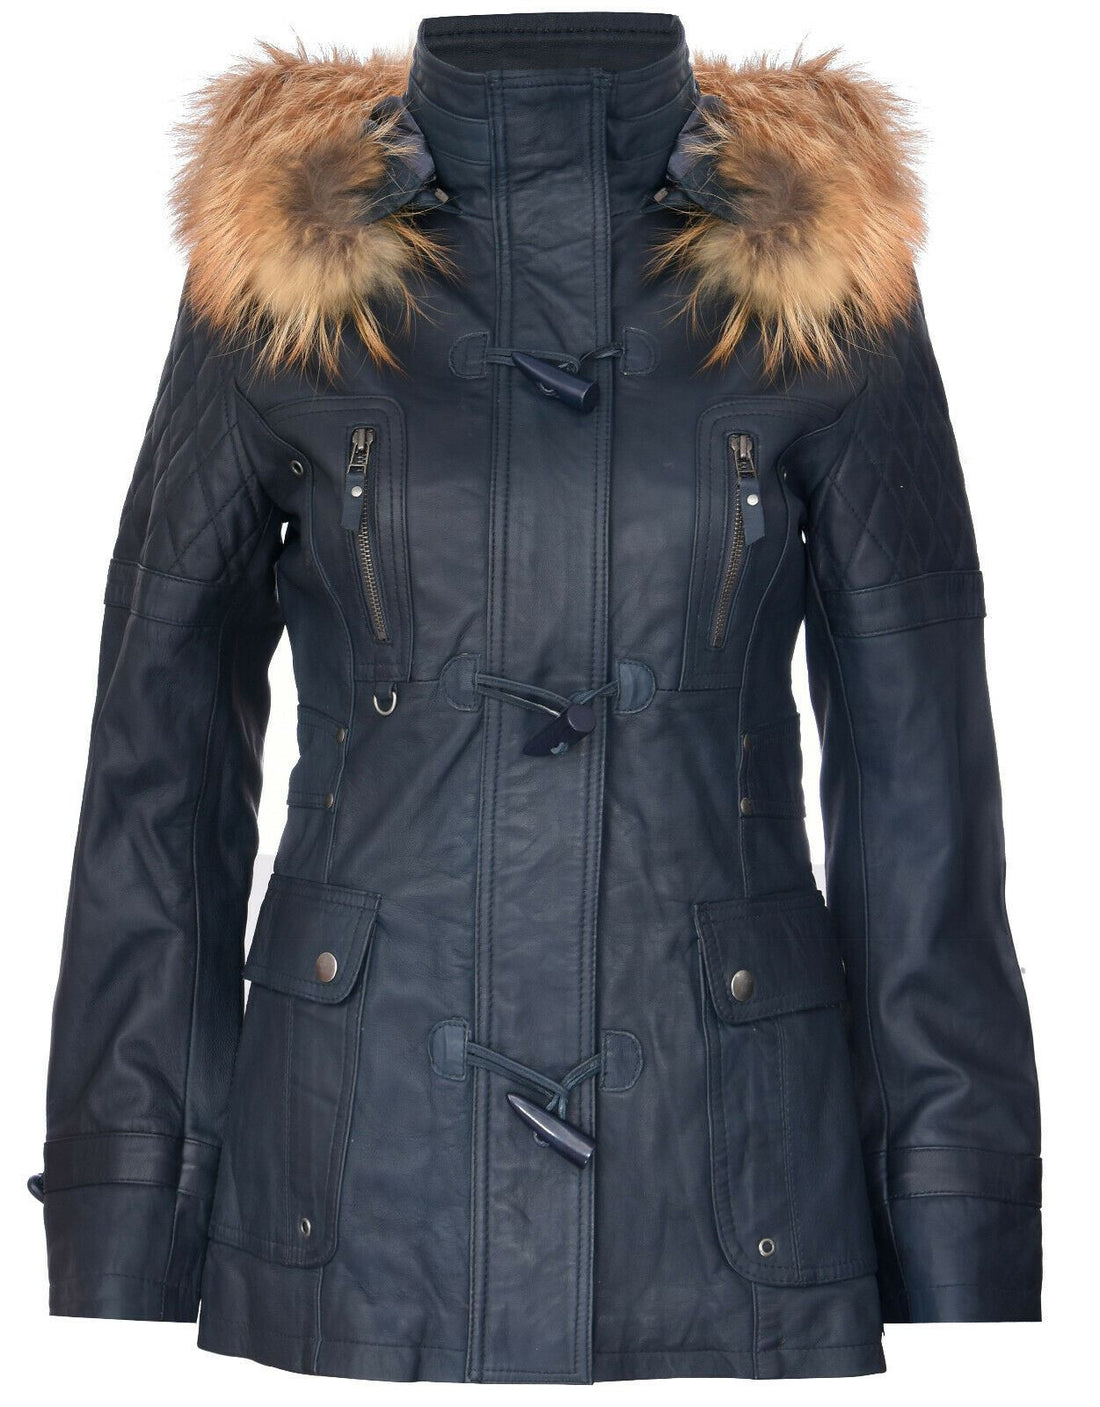 Womens Quilted Leather Hooded Parka Jacket-Northampton